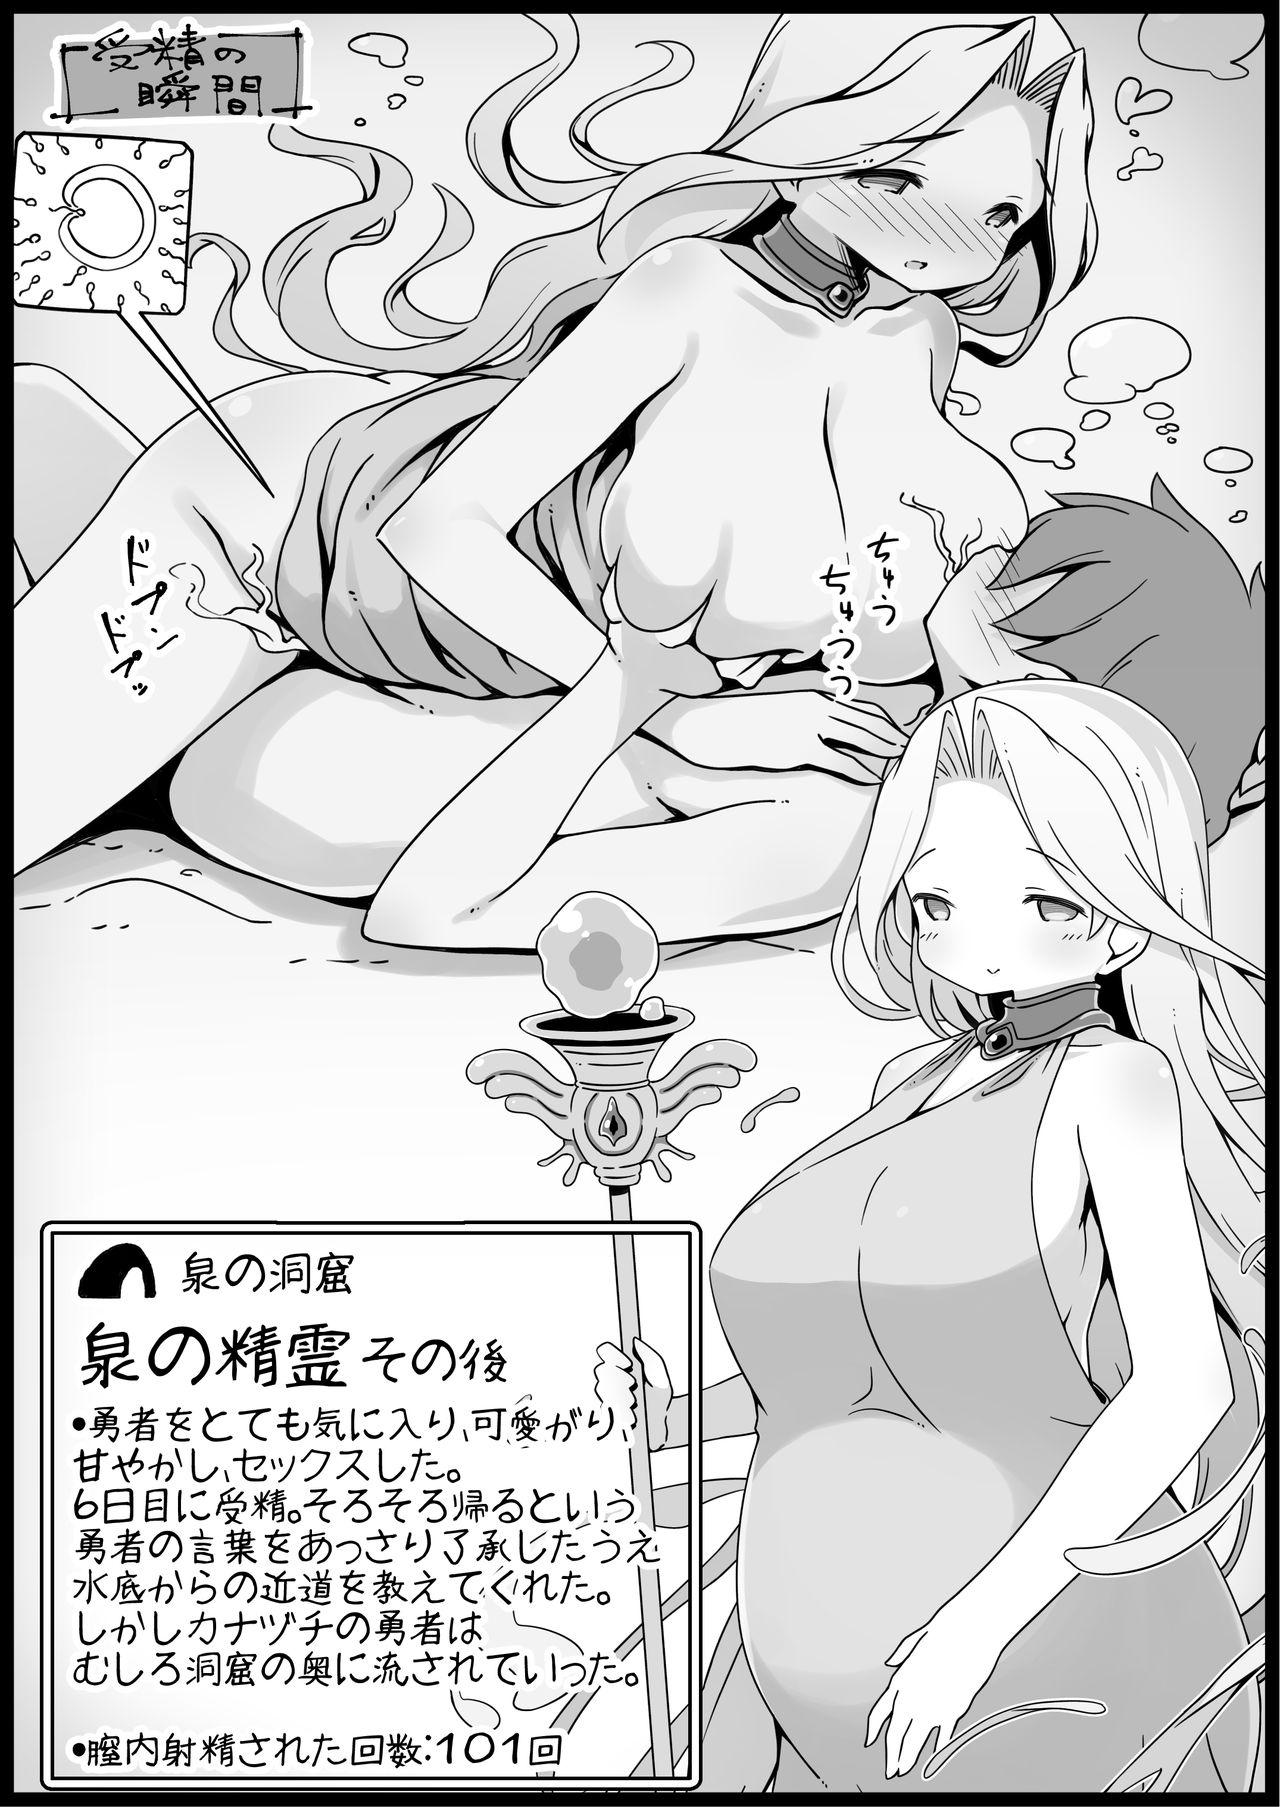 [Succubus Egg] Fantasy World 2 Too Forgiving to Heroes-Continued NPC (mob) Opponent-Centered Short H Manga Collection- 44